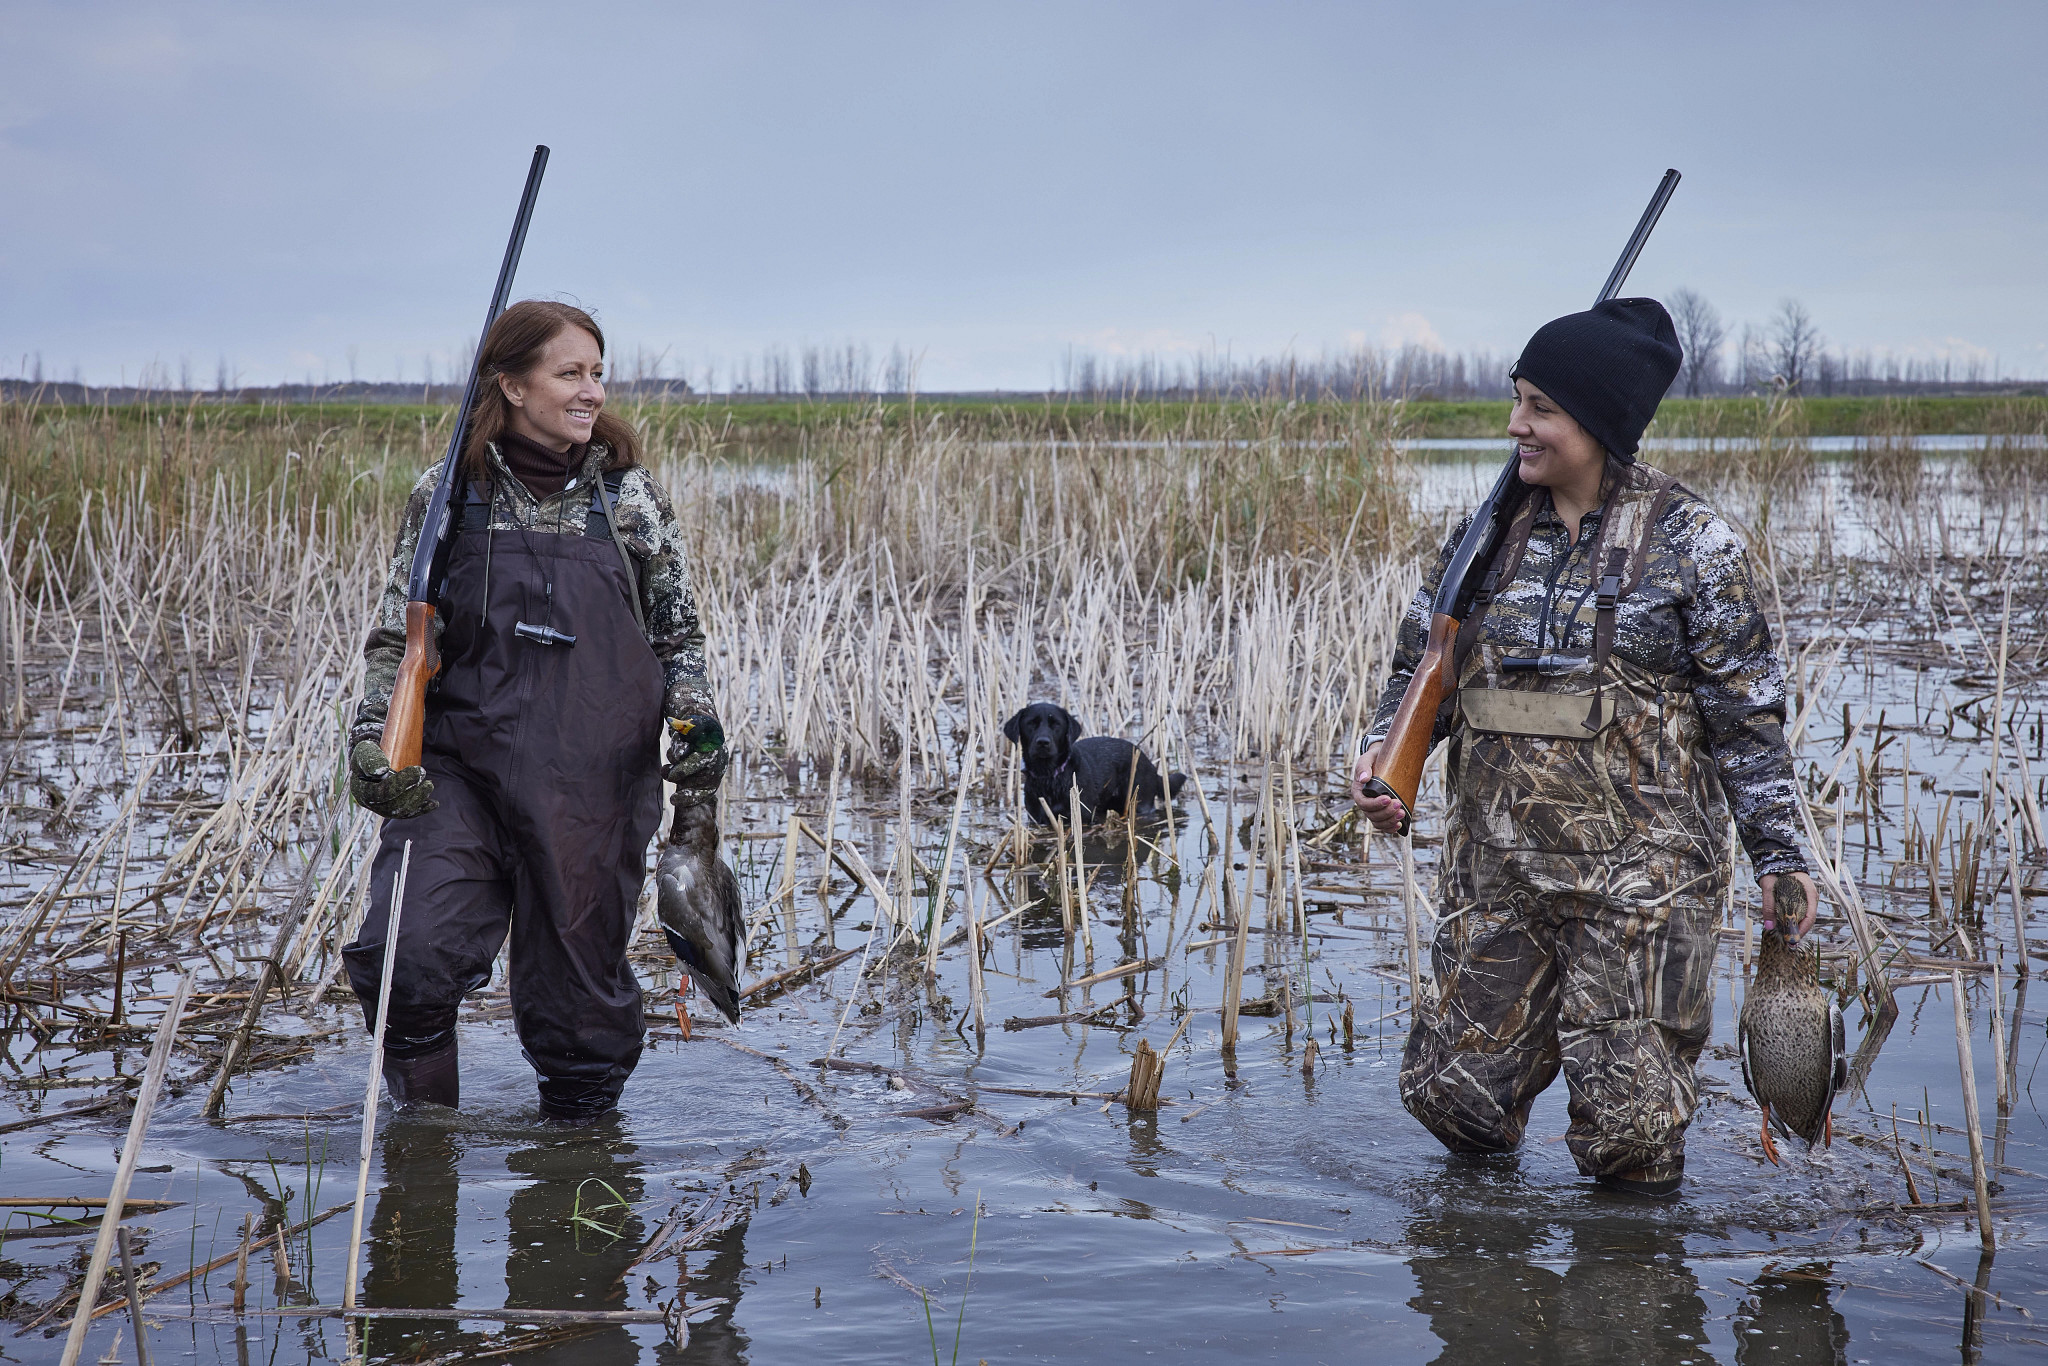 two women wearing camo waders stand in water while duck hunting